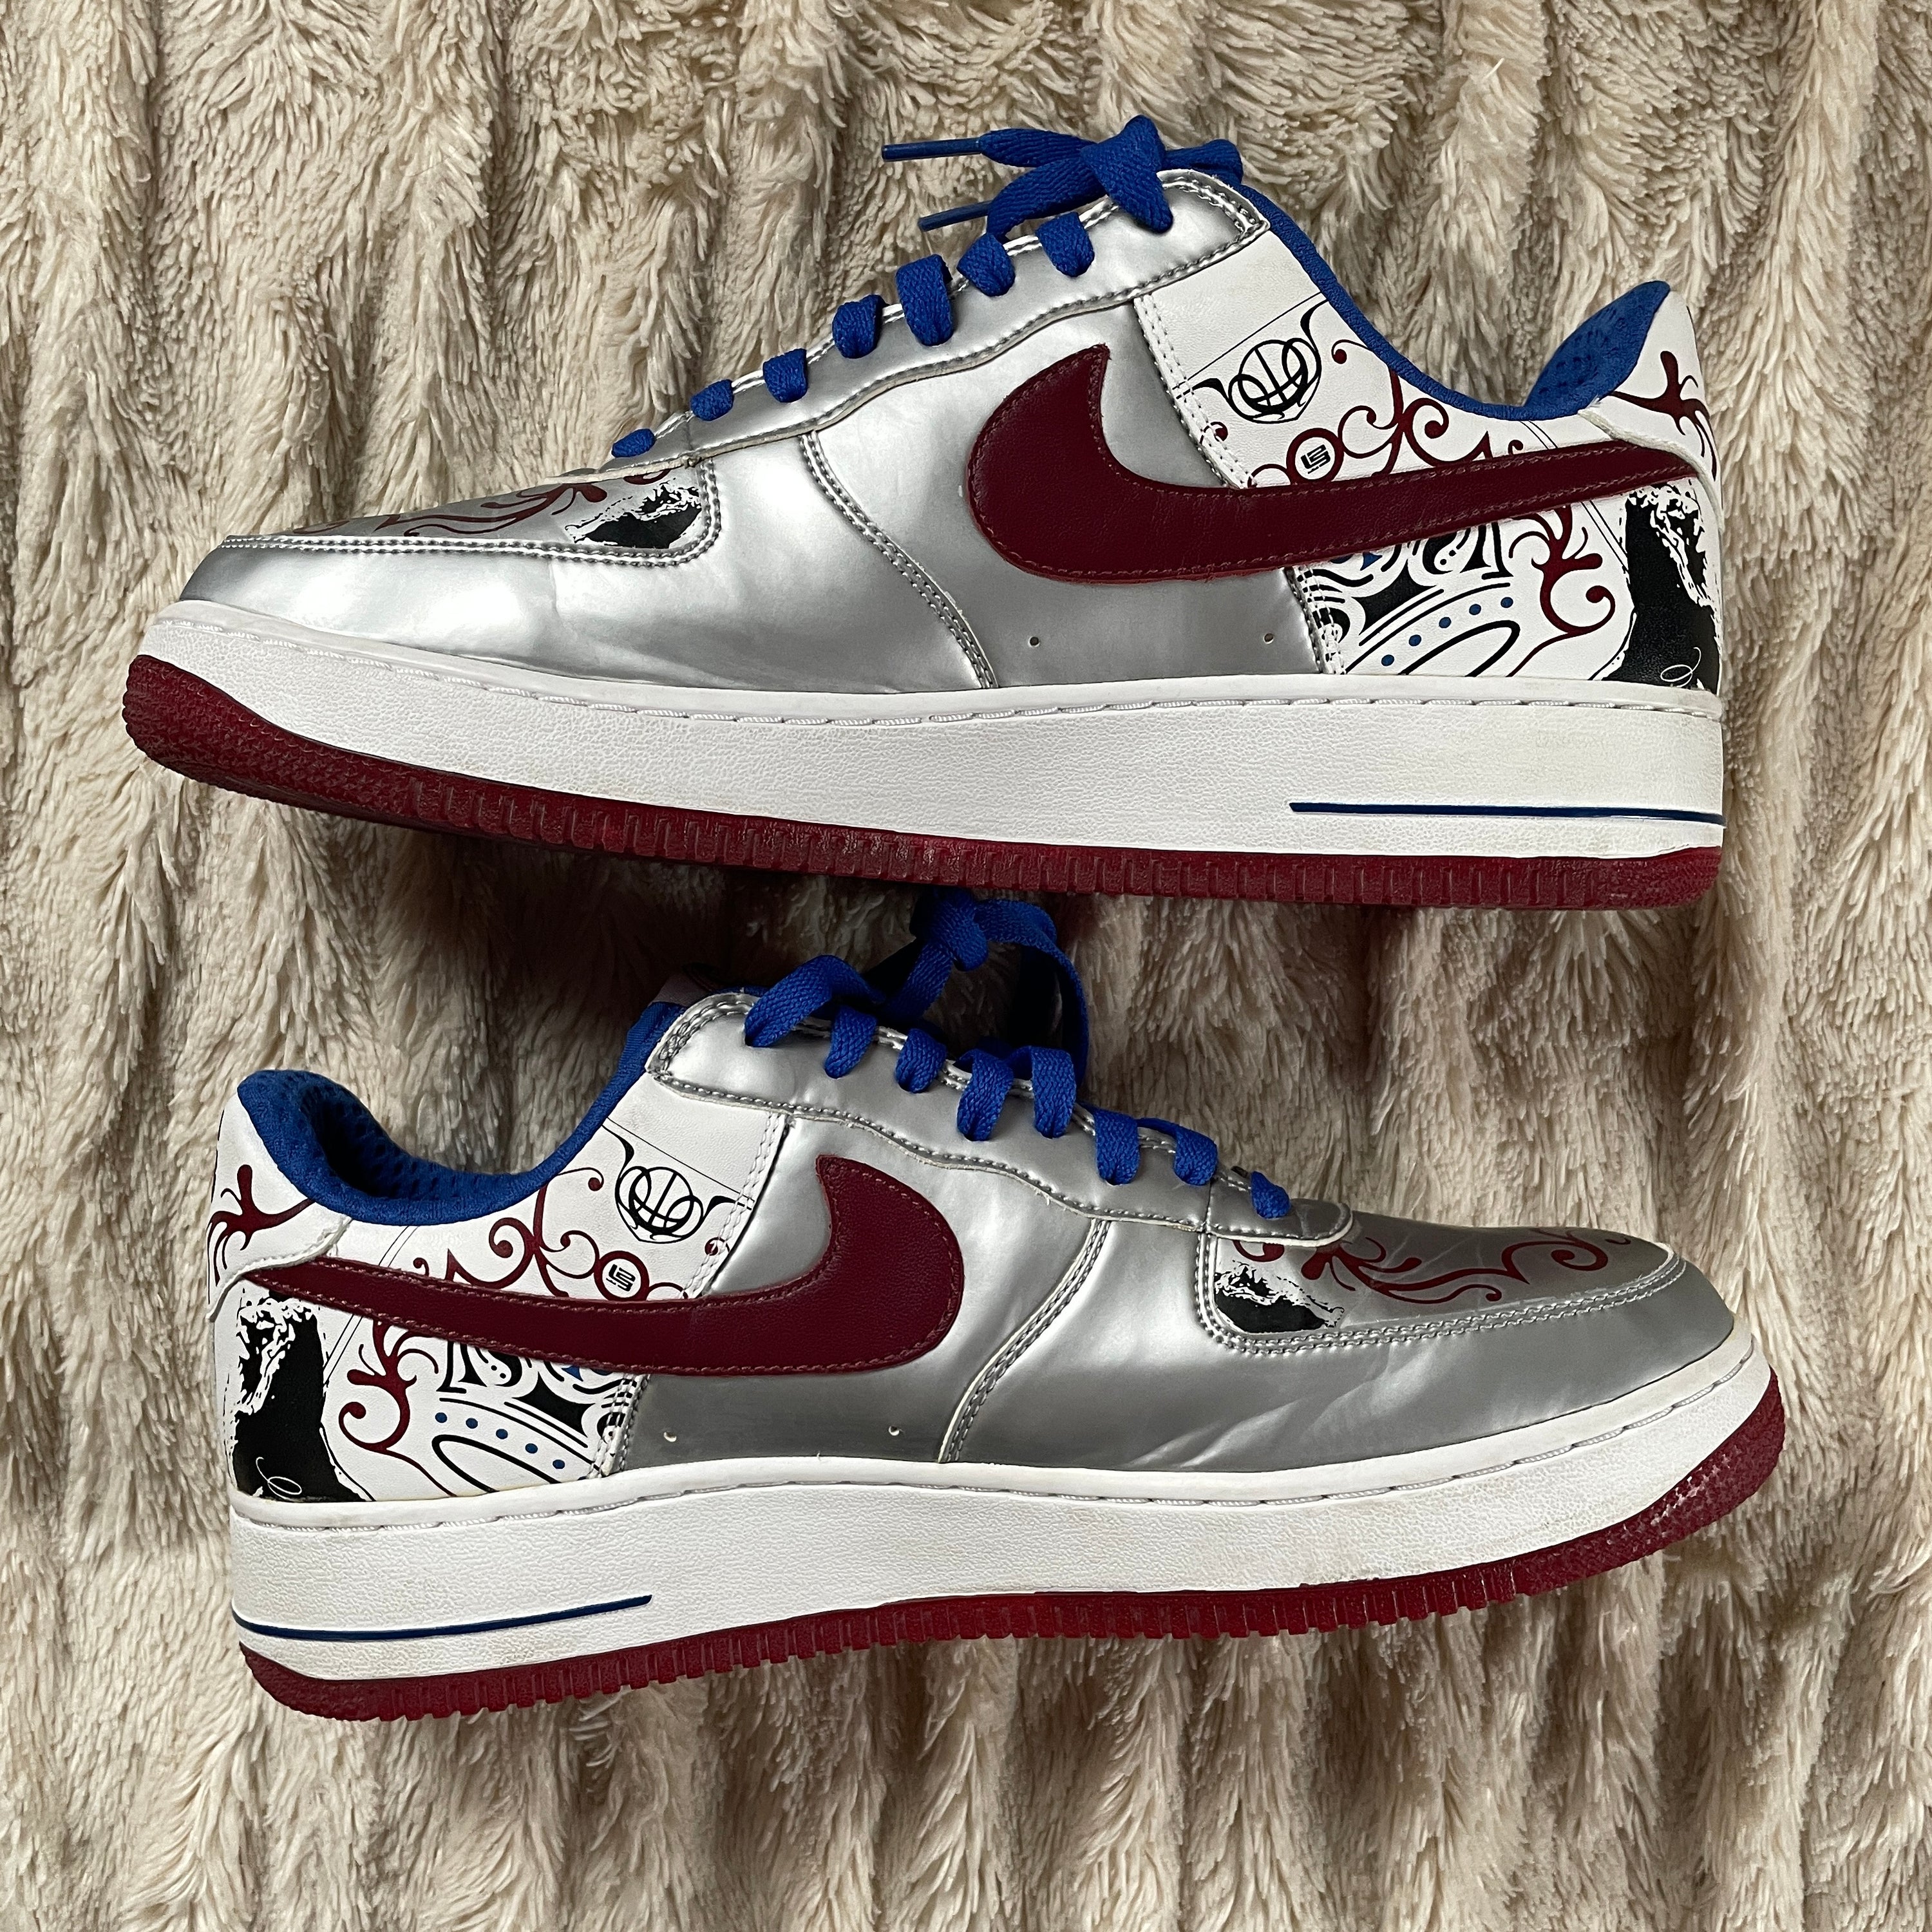 US 12  - NIKE AIR FORCE 1 LOW PREMIUM "COLLECTION ROYALE LEBRON" [2006]